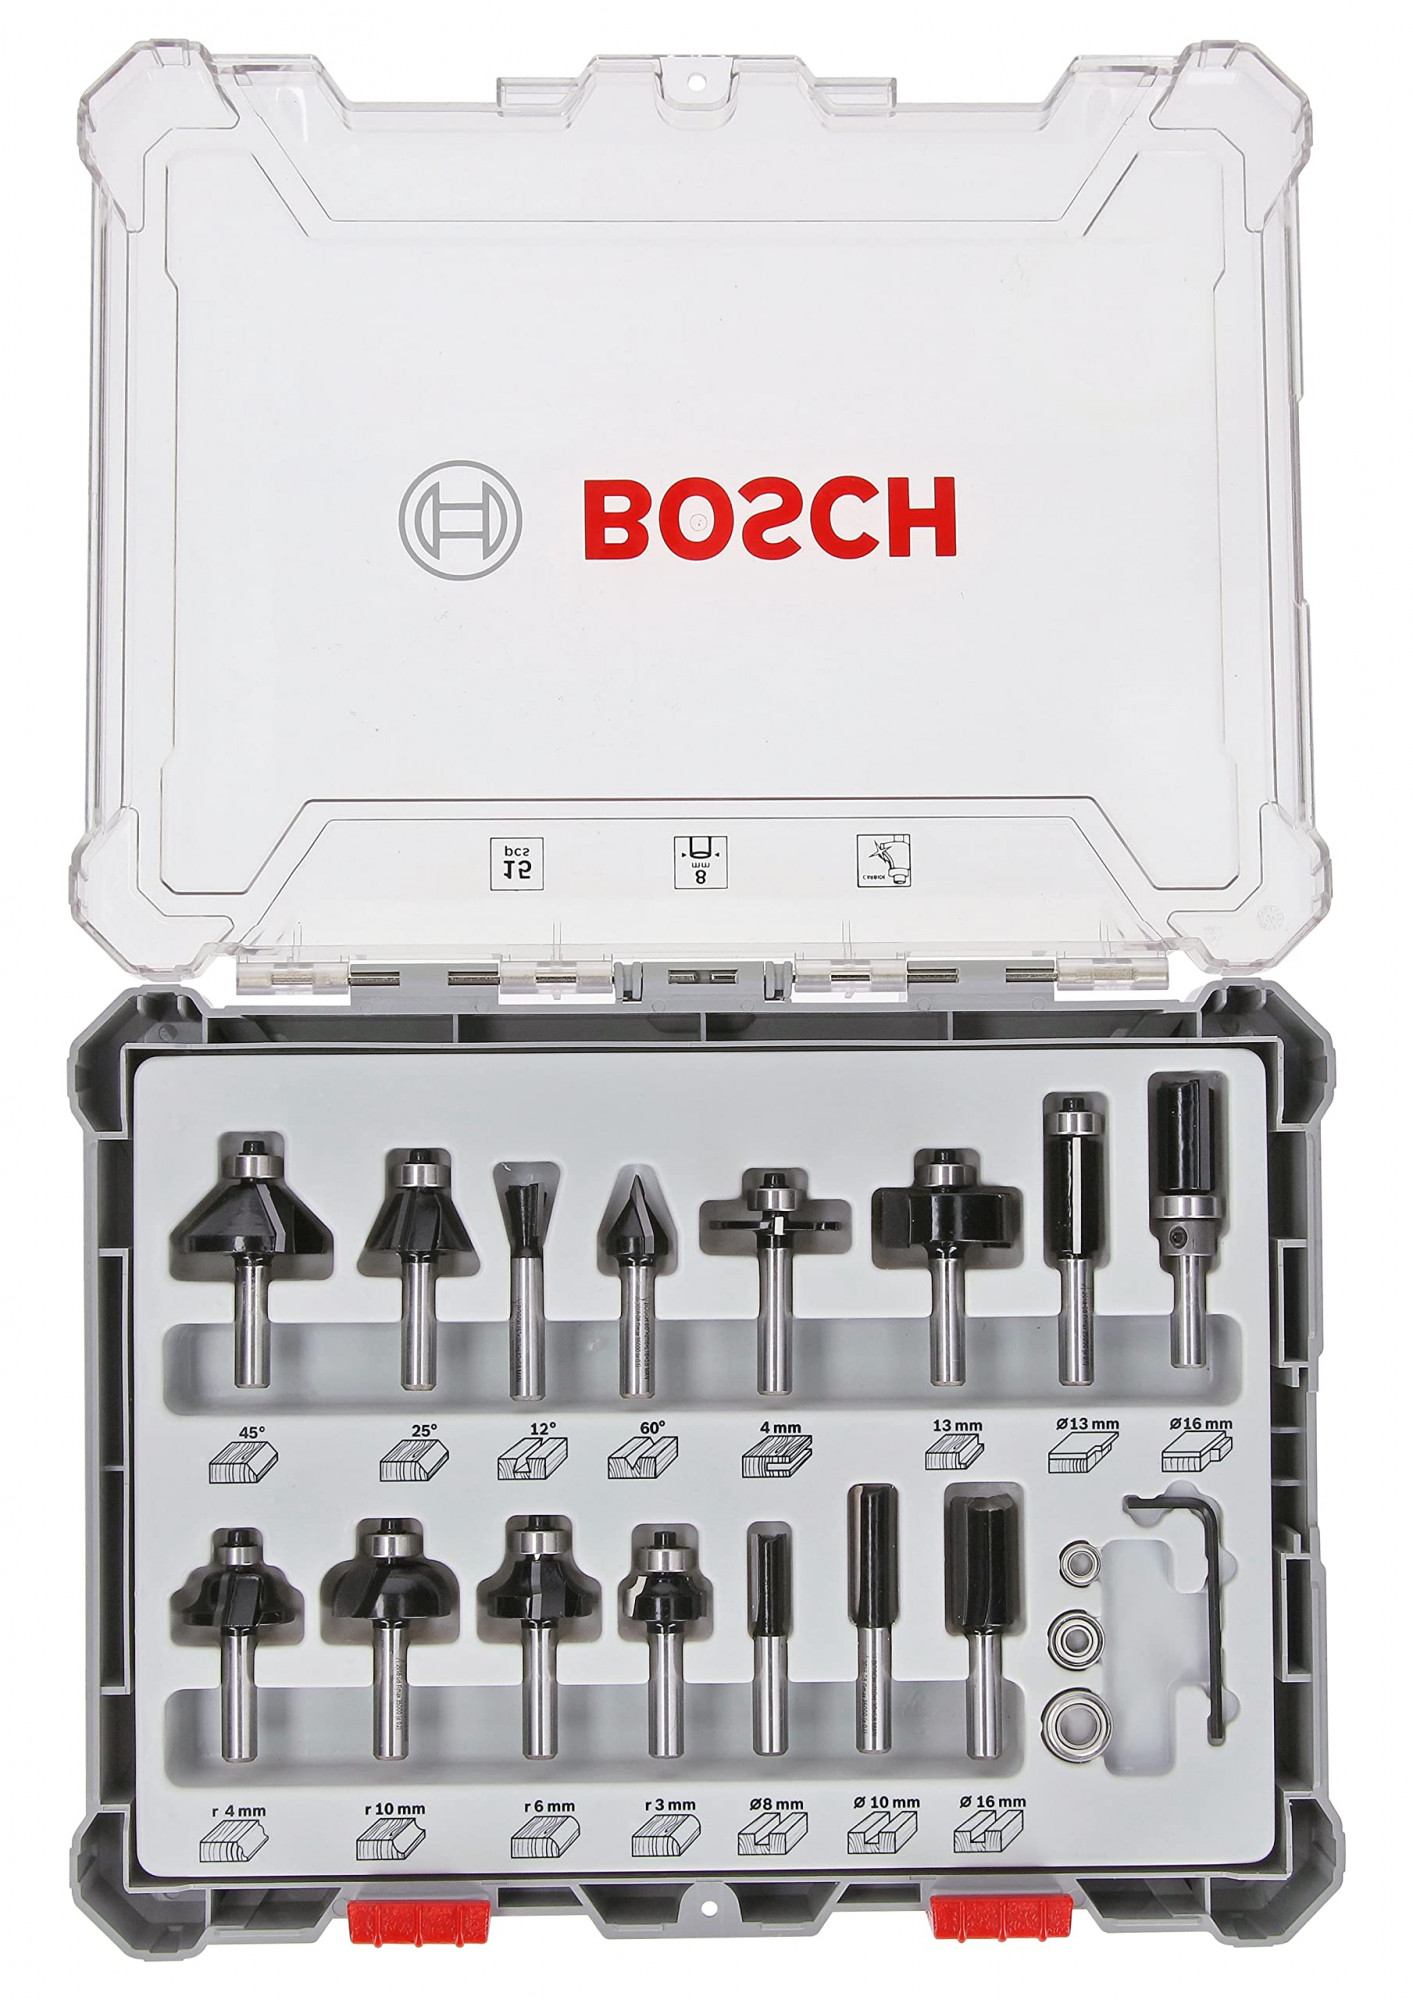 Bosch Professional 15 Piece Router Bit Set, With Mixed Bits, Shank Size 8mm, Suitable For Gof 130 Router